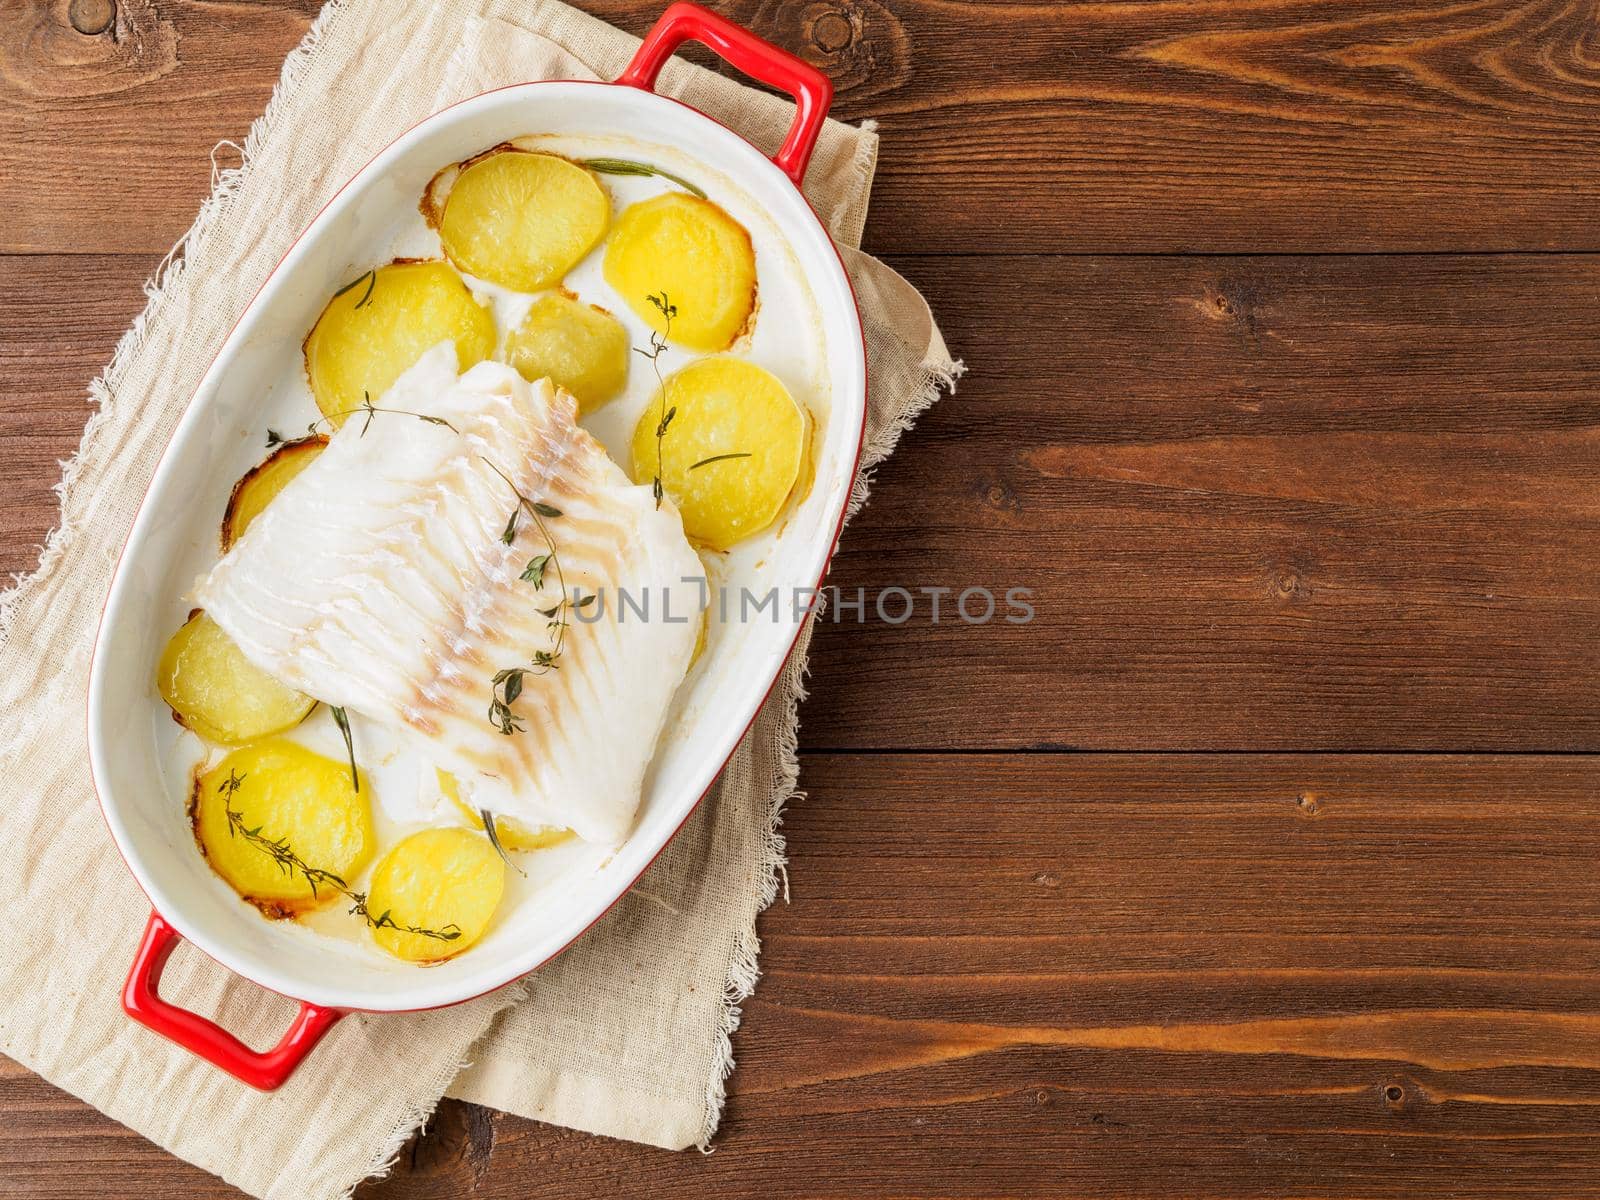 Fish cod baked in the oven with potatoes and spice and thyme - healthy diet healthy food. Dark wooden brown background, top view.